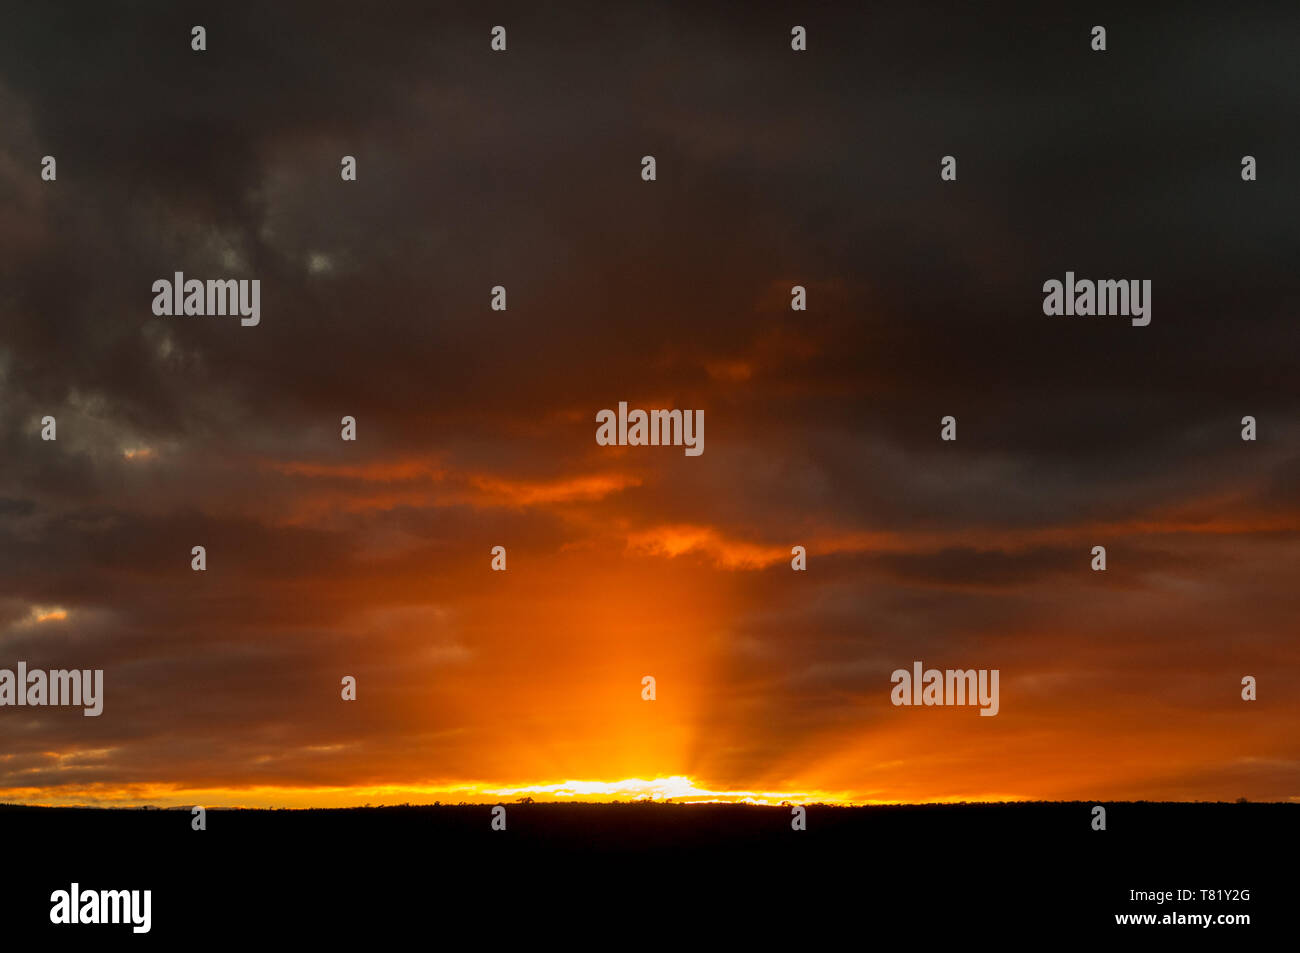 Colourful sunset in Australia's outback. Stock Photo